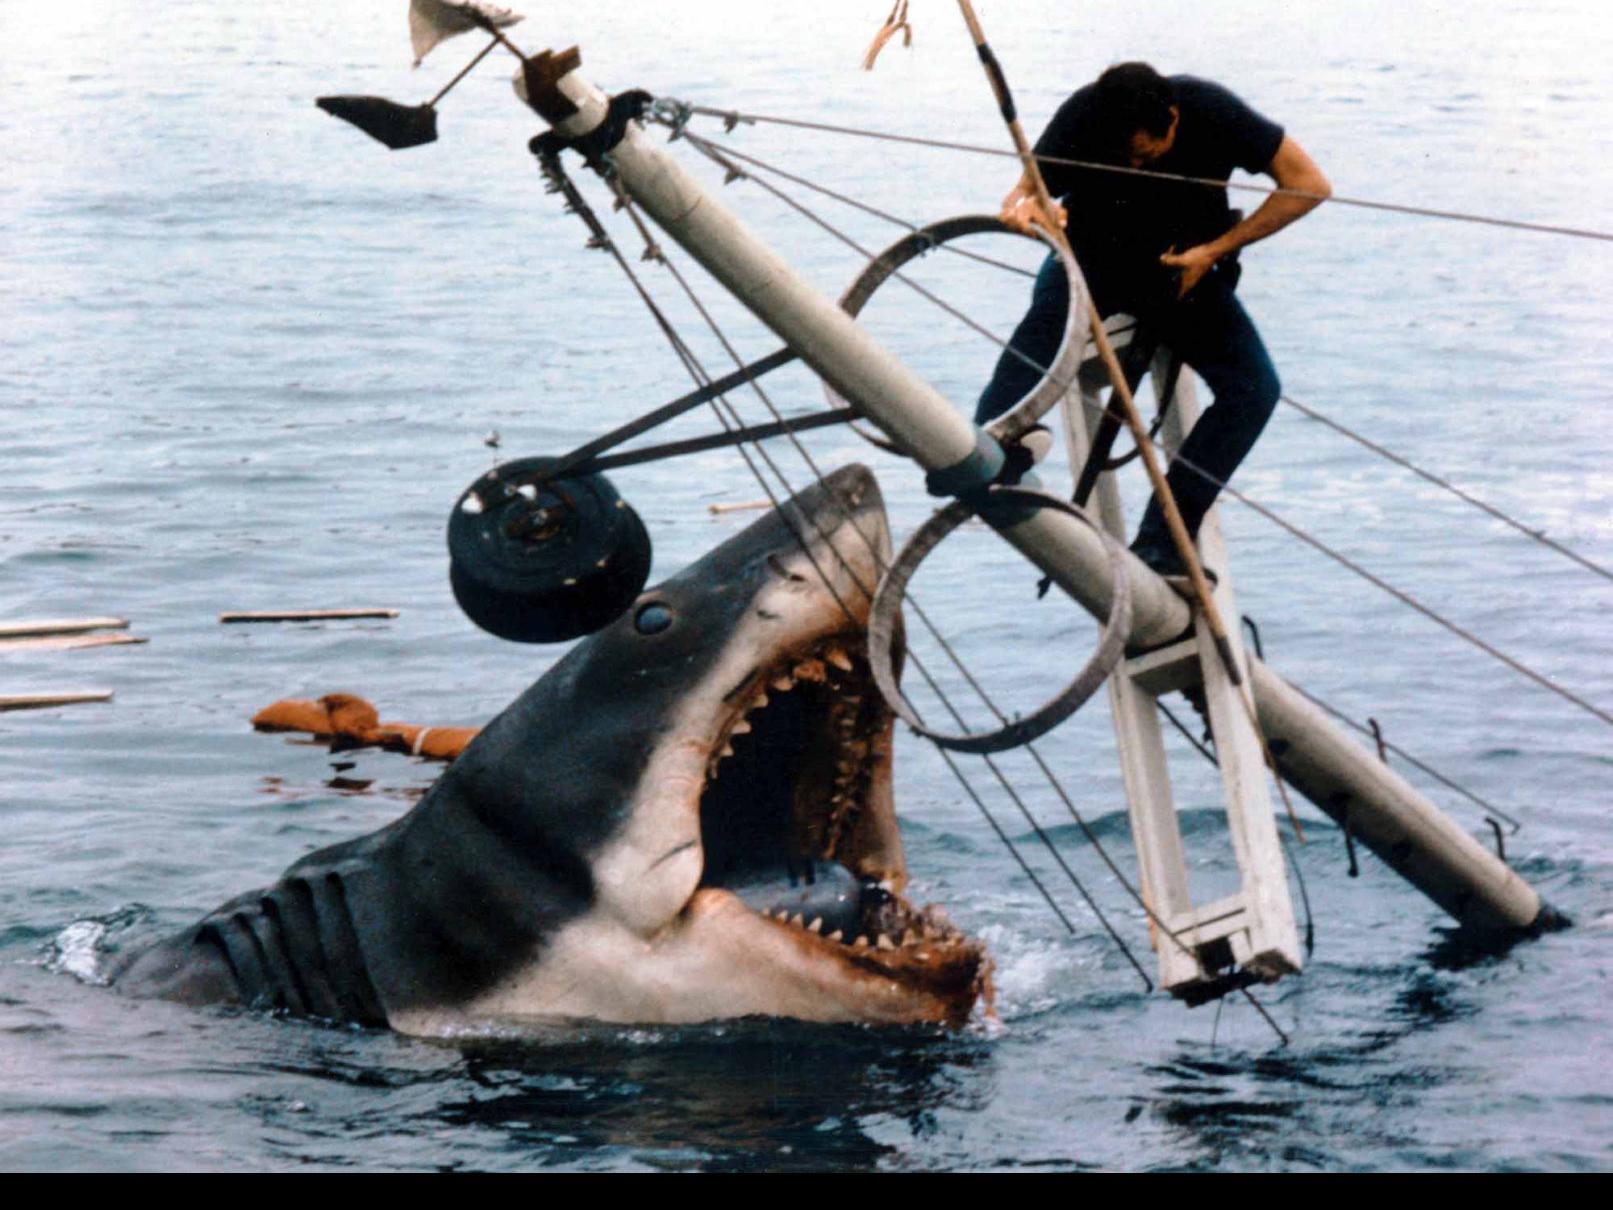 Mechanical 'Jaws' shark taken to Museum of Motion Pictures in Los